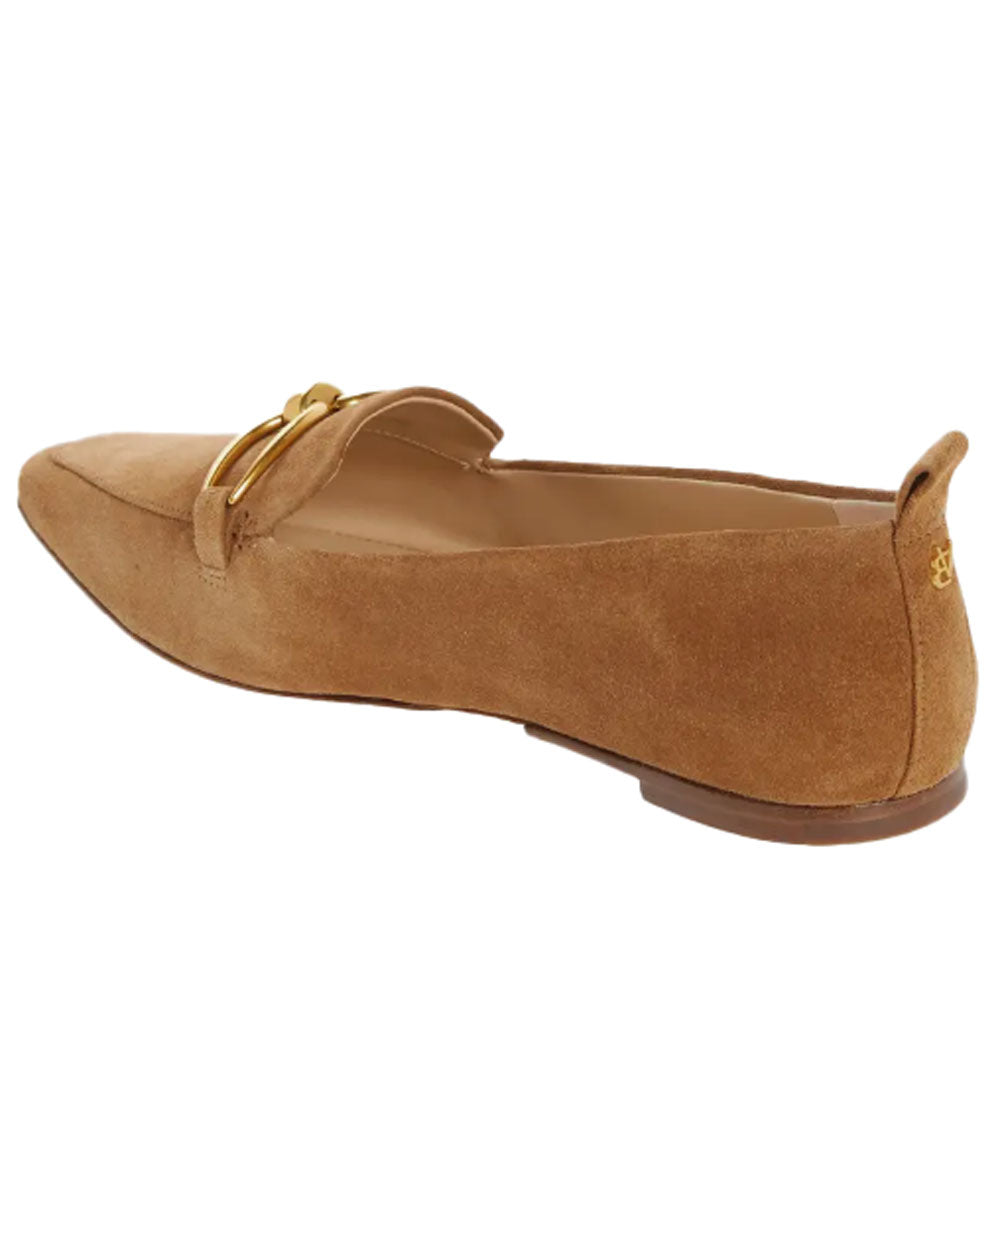 Champlain Chain Pointed Toe Flat in Hazelwood